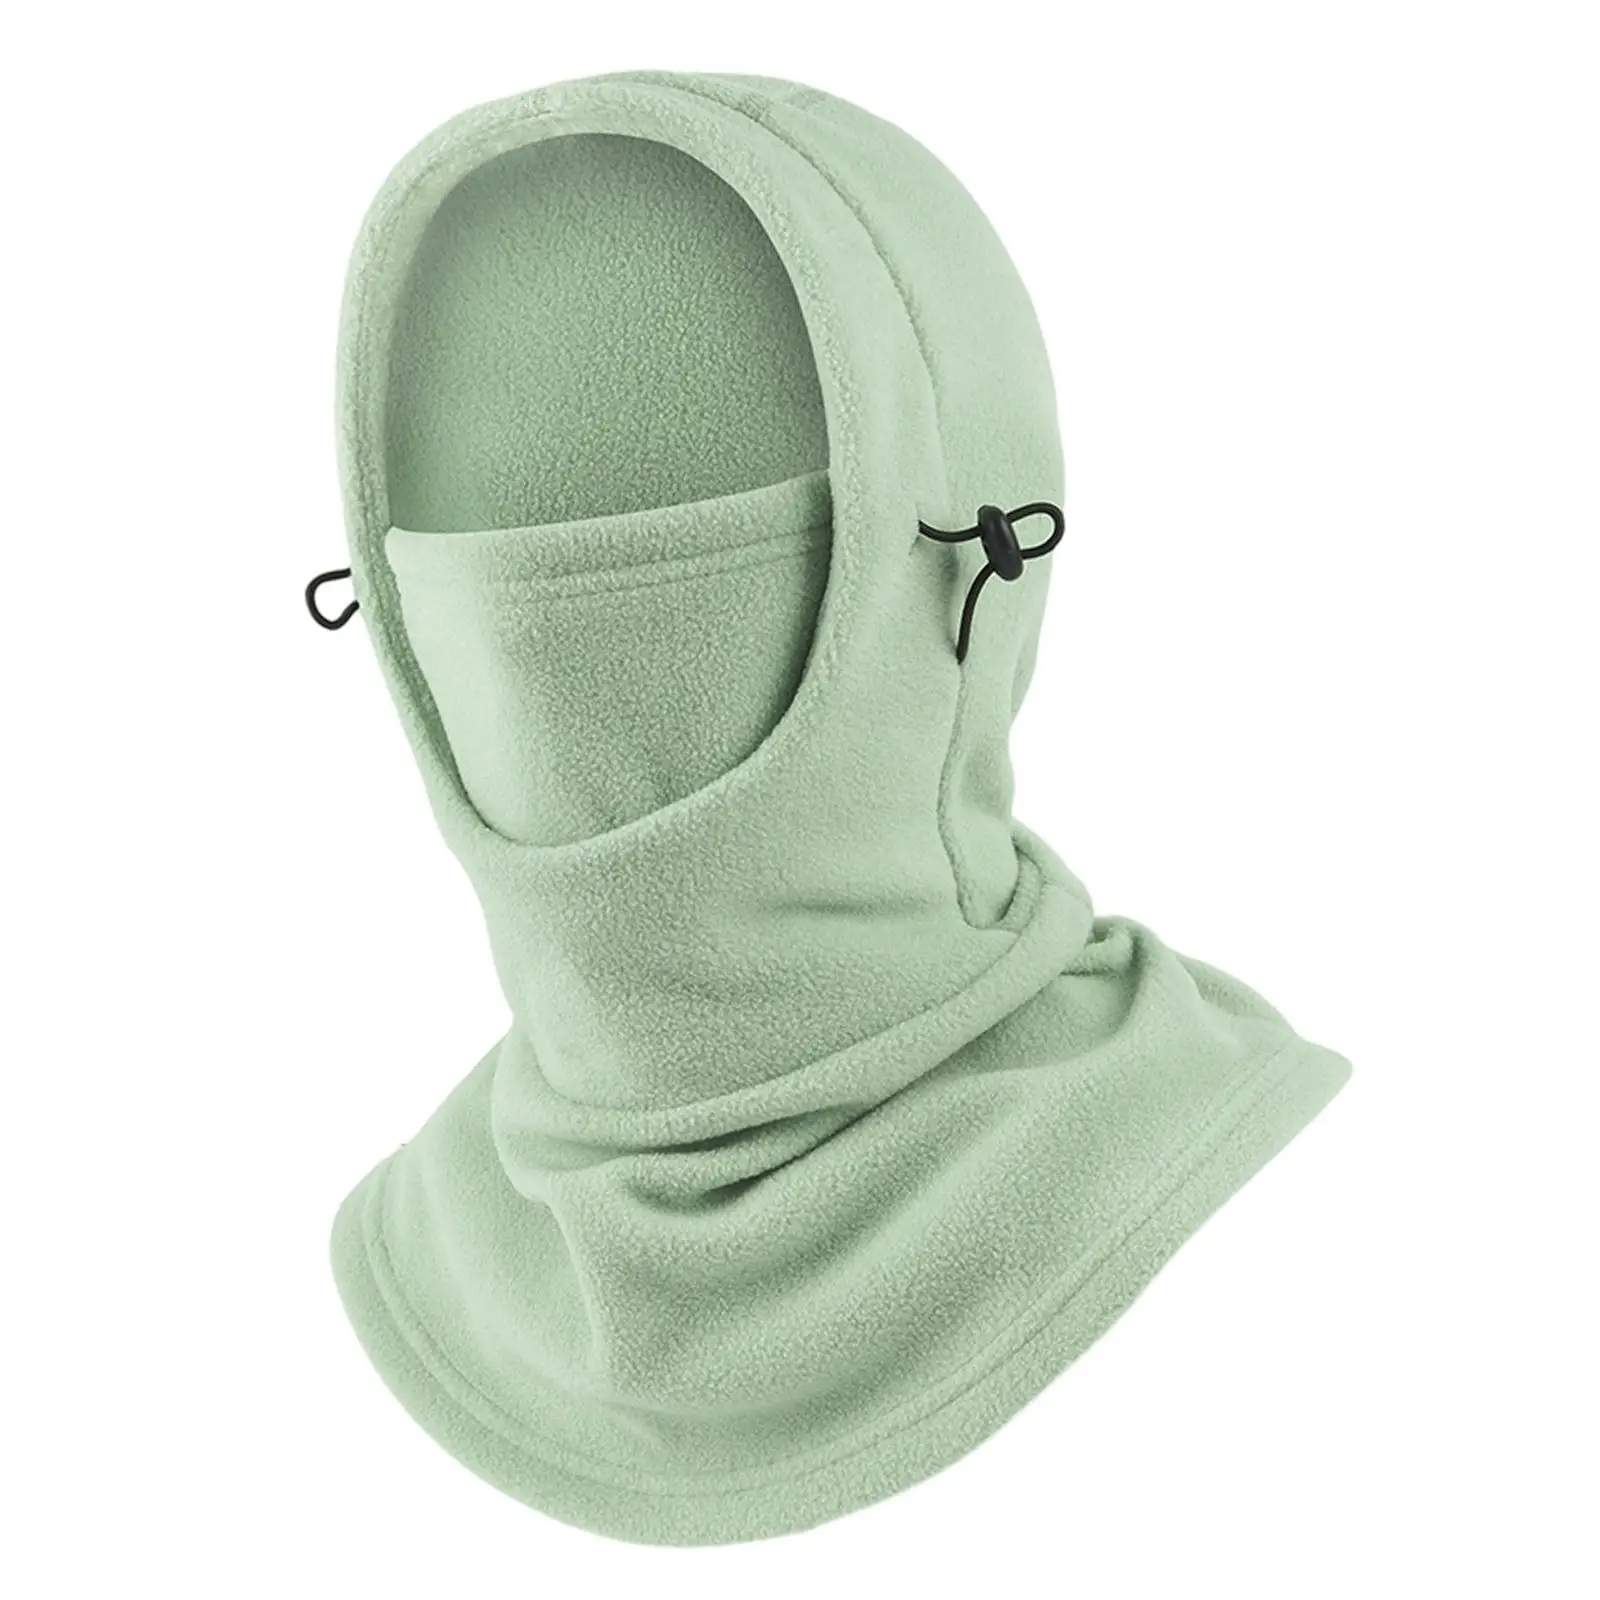 Ski Mask Balaclava Face Cove Thermal Headwear Windproof Hood Face Mask for Camping Biking Riding Outdoor Activities Fishing